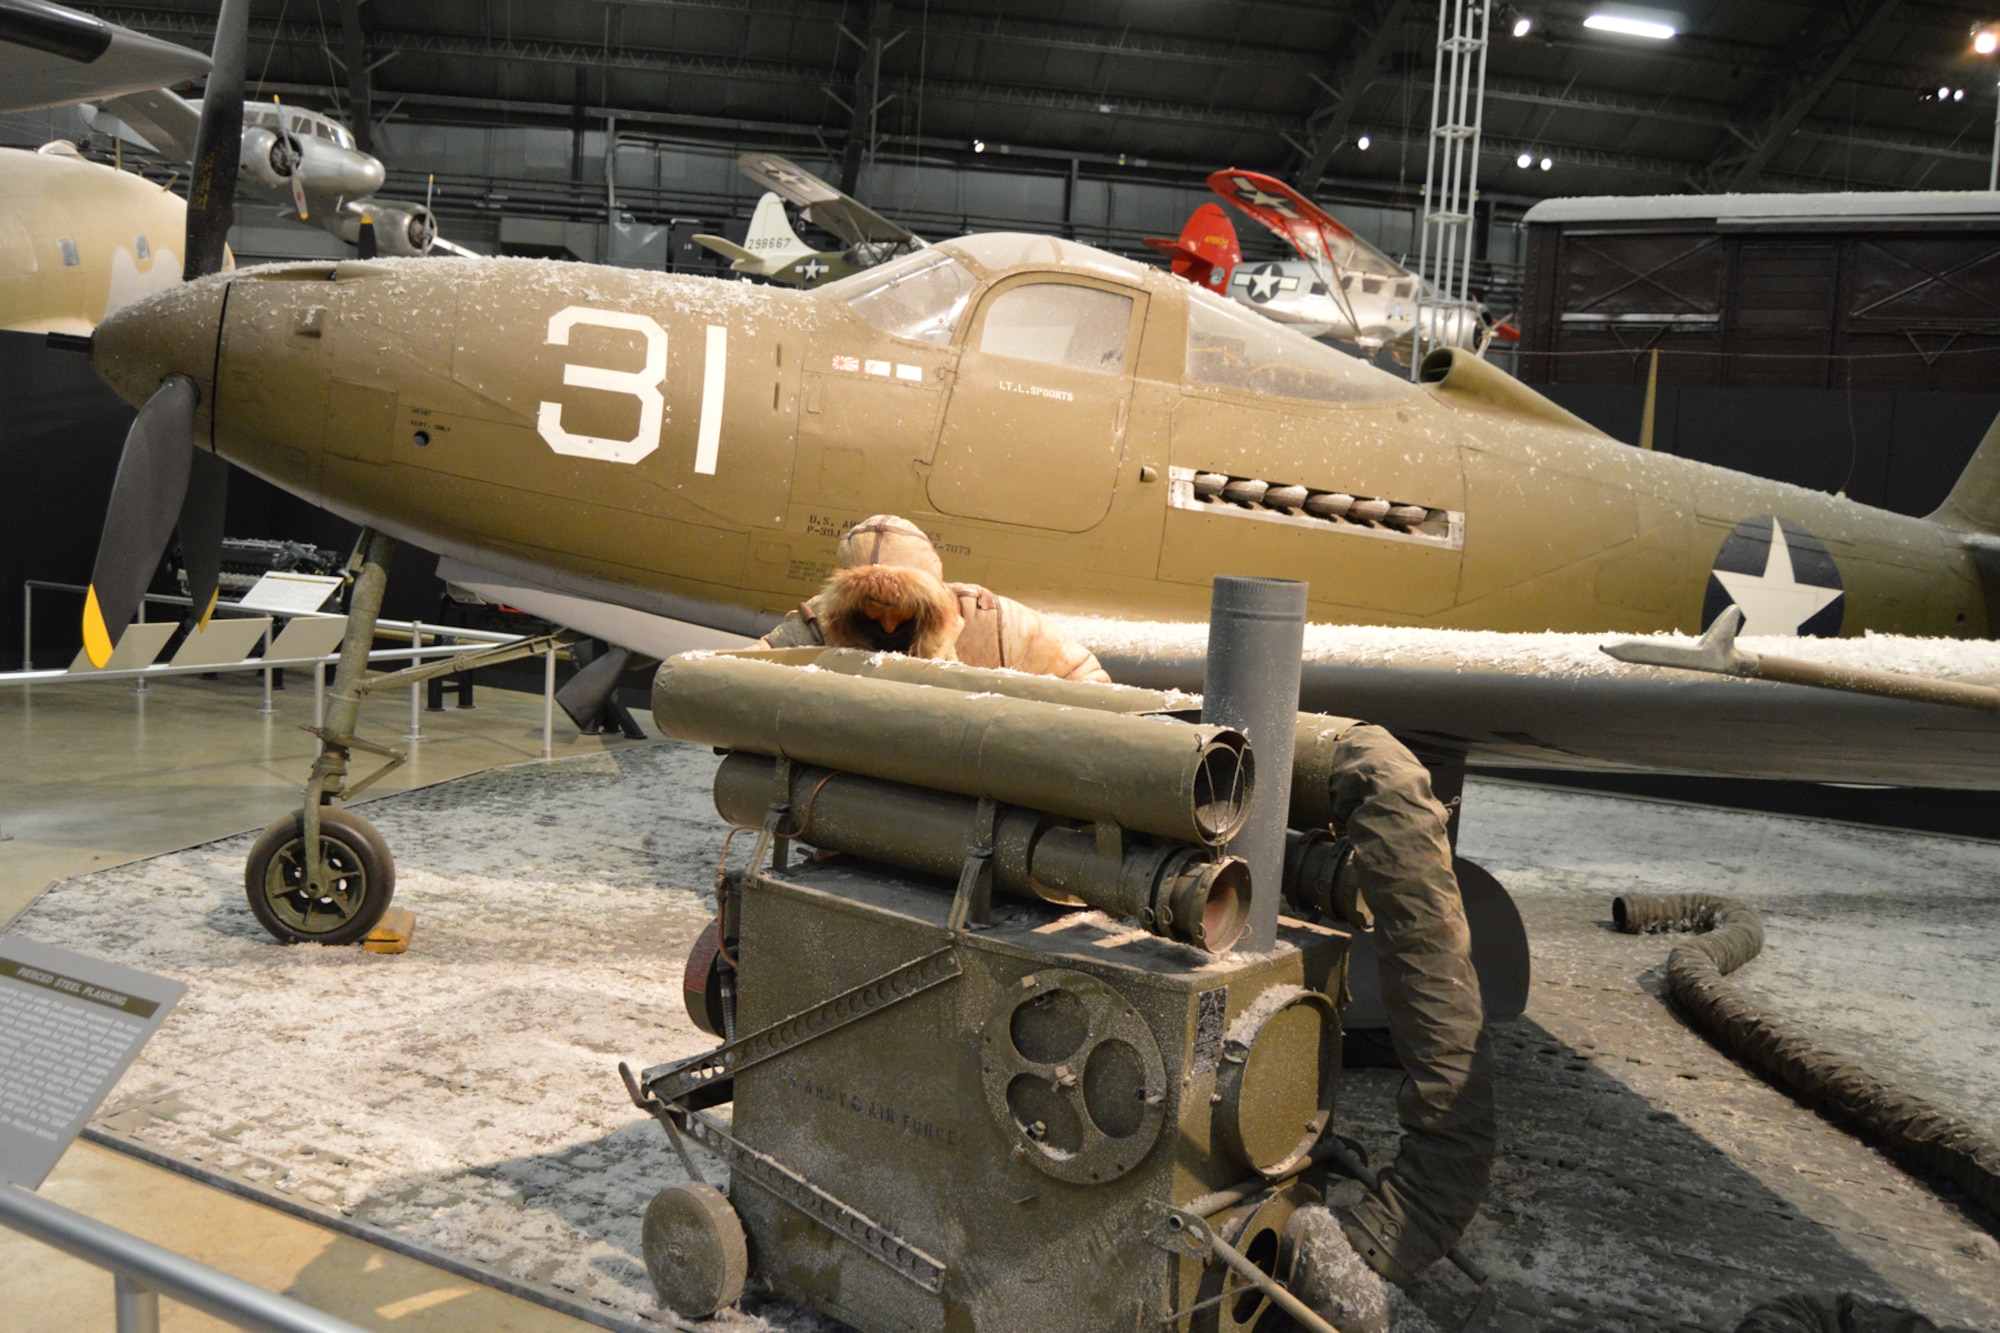 DAYTON, Ohio -- Bell P-39Q Airacobra in the World War II Gallery at the National Museum of the United States Air Force. (U.S. Air Force photo)
